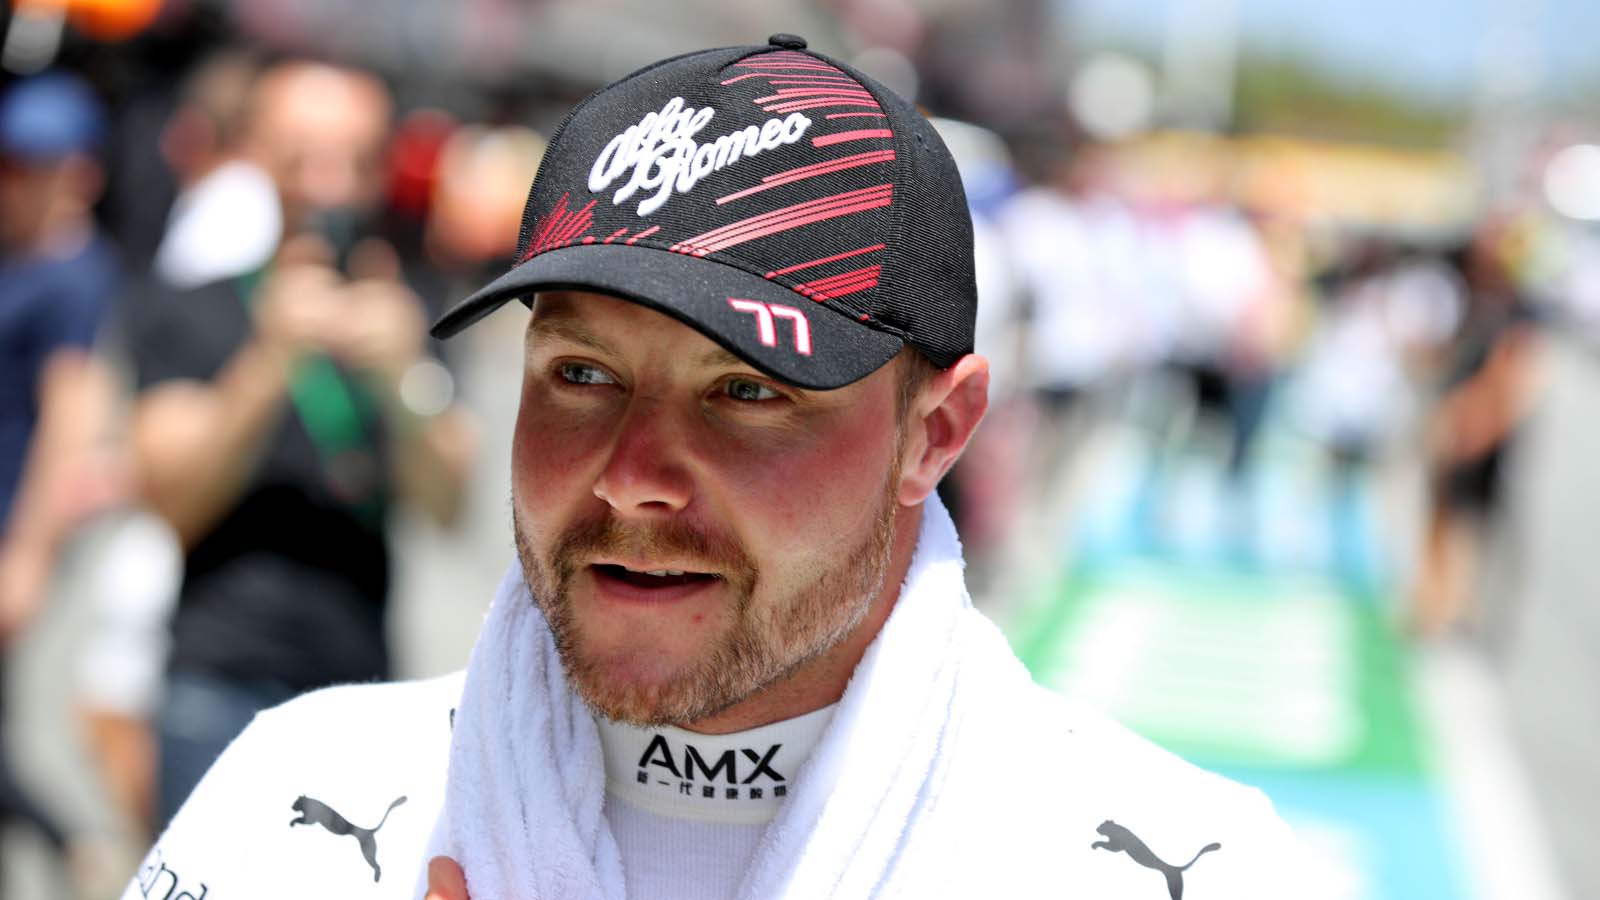 Bottas thought ‘it could be our day’, but his ‘tyres died’